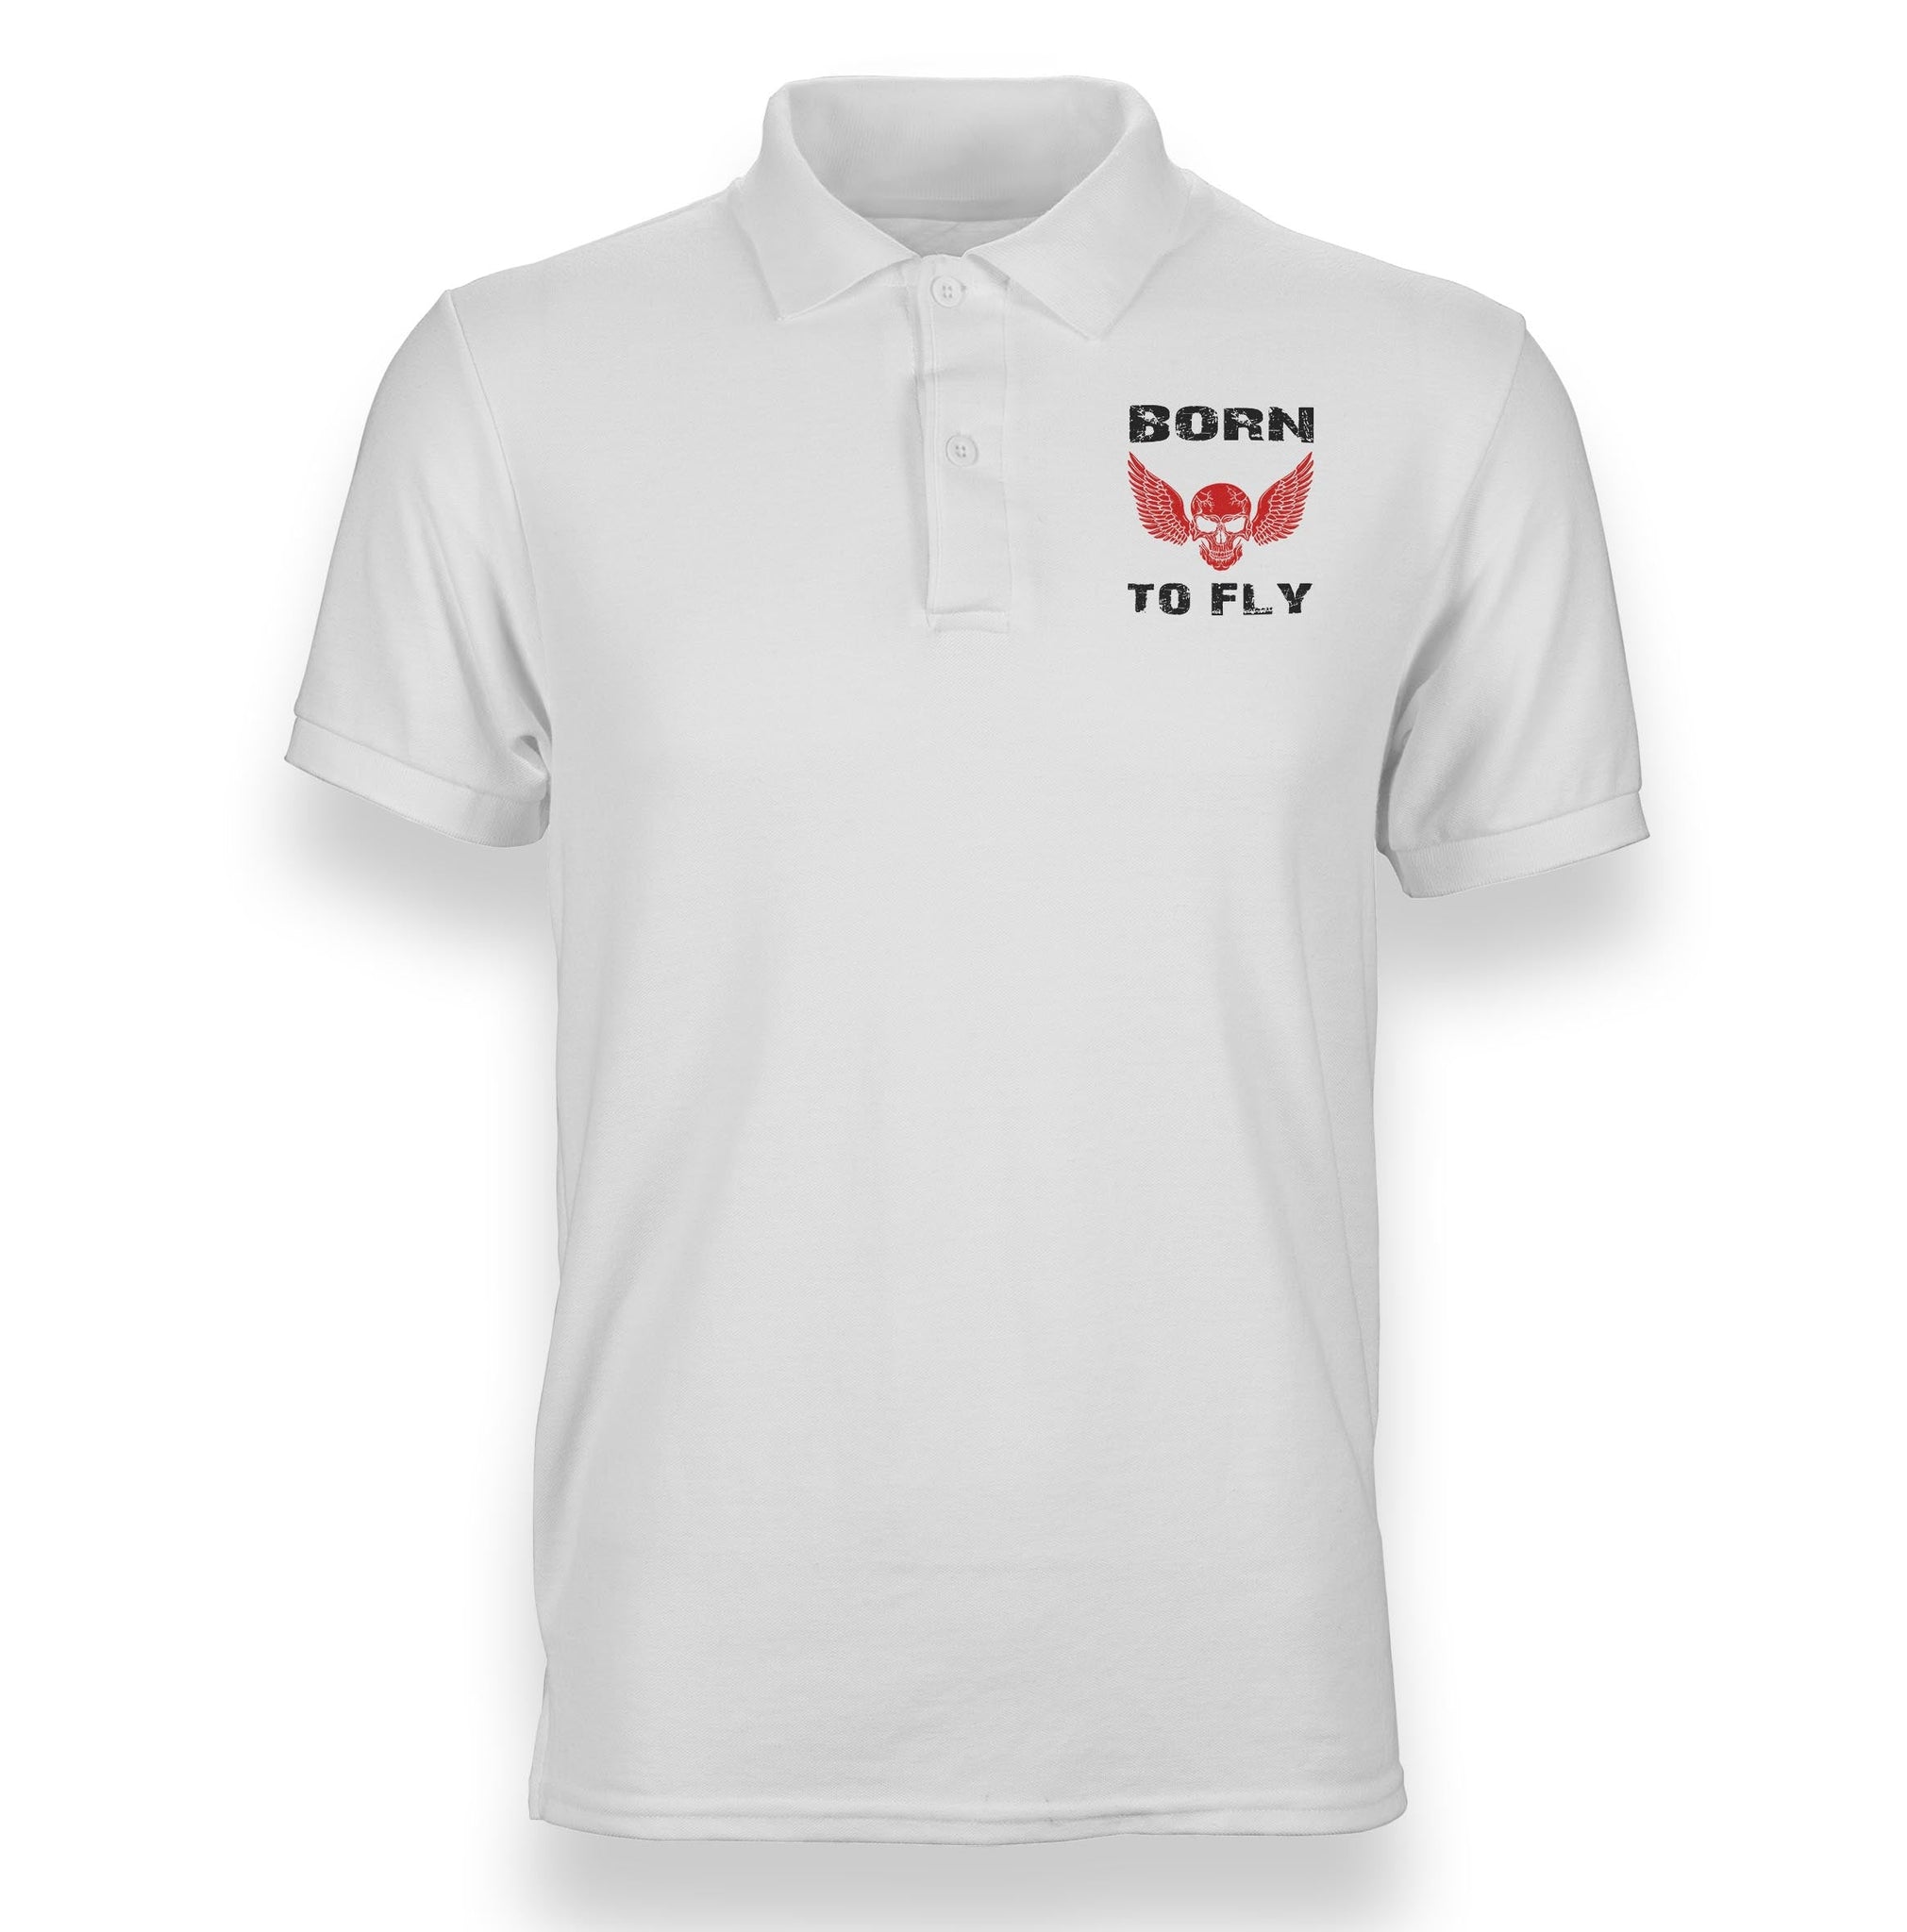 Born To Fly (Skeleton) Designed Polo T-Shirts